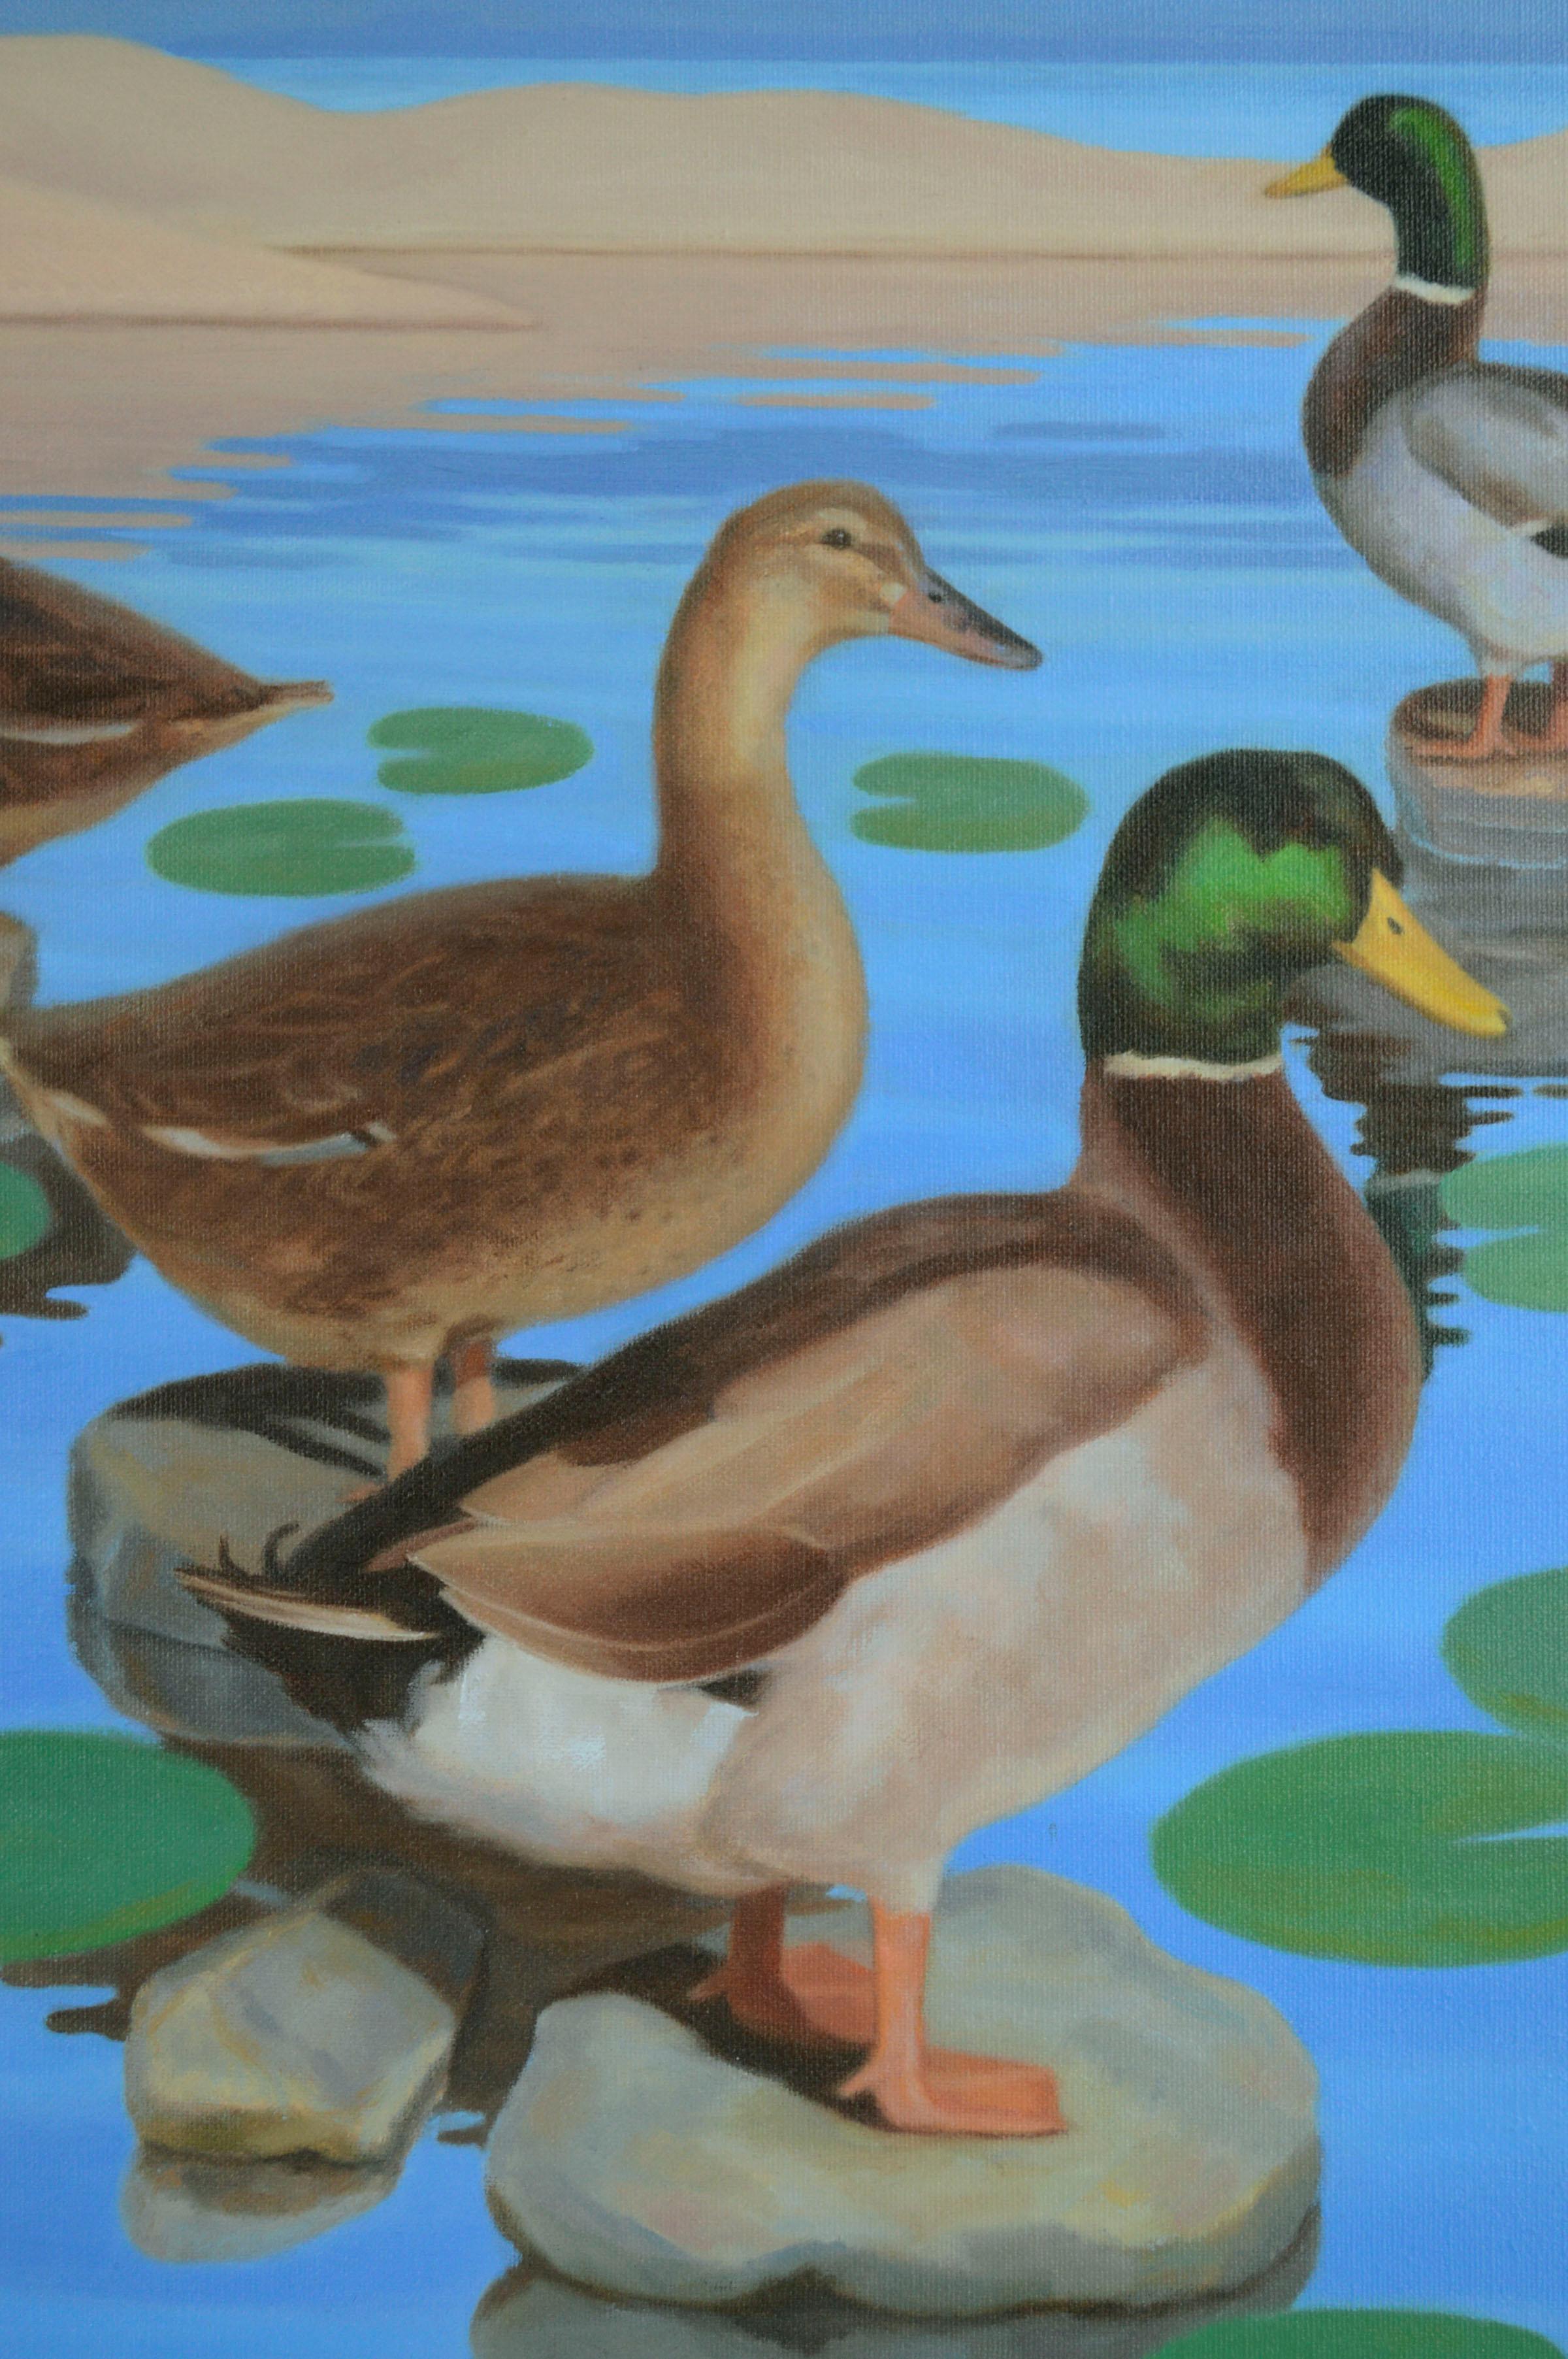 Mallard Ducks in Pond with Lily Pads, Horizontal Landscape  - Realist Painting by Hugh Hendry 